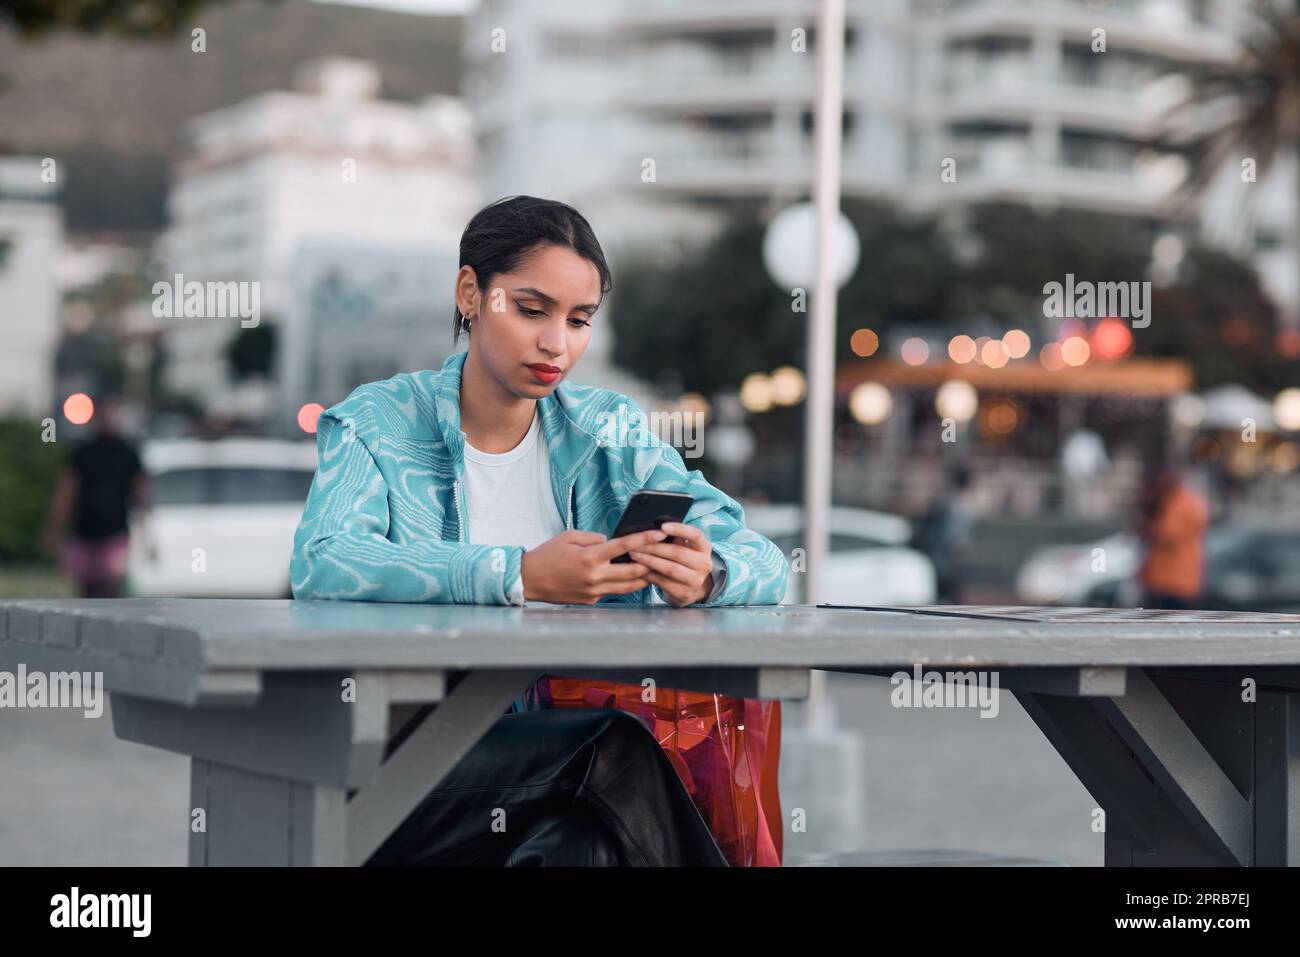 Edgy, sad and lonely woman texting on social media dating app on a phone and looking serious, depressed or bored outside in an urban city. A single girl posting about her bad emotional breakup online Stock Photo